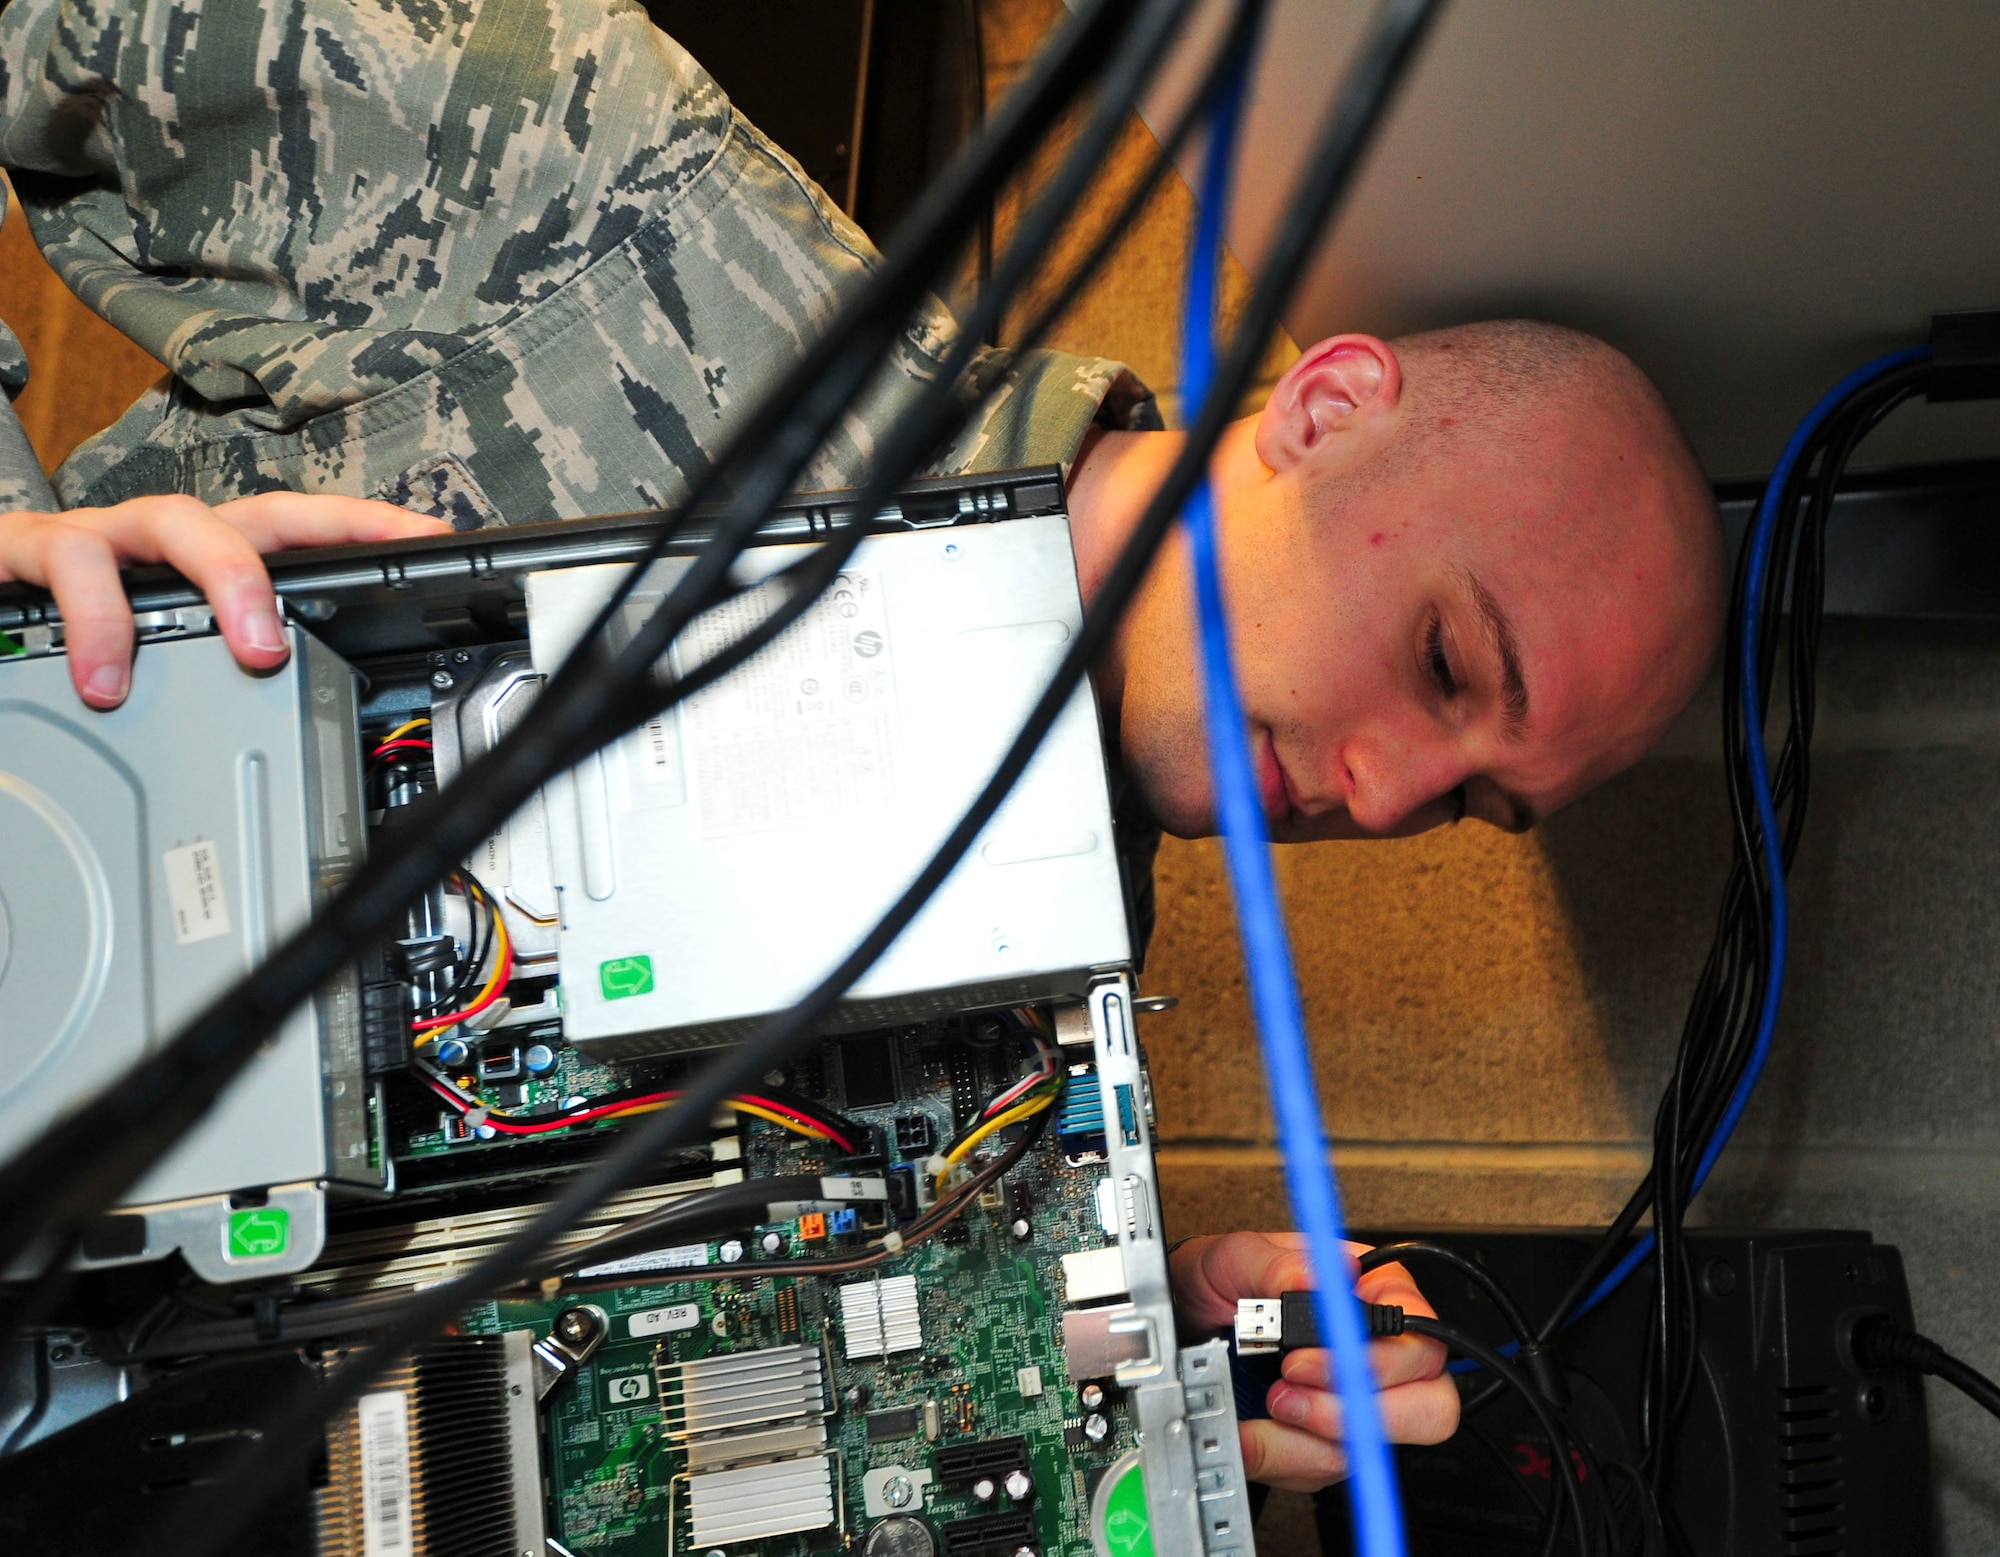 Airman 1st Class Tyler Crowson, 325th Communication Squadron client systems technician, plugs in a cable as he troubleshoots a desktop computer Feb. 11 at the 325th CS annex. As a CST, Crowson is tasked with fixing computers when problems arise. (U.S. Air Force photo by Senior Airman Dustin Mullen/Released)